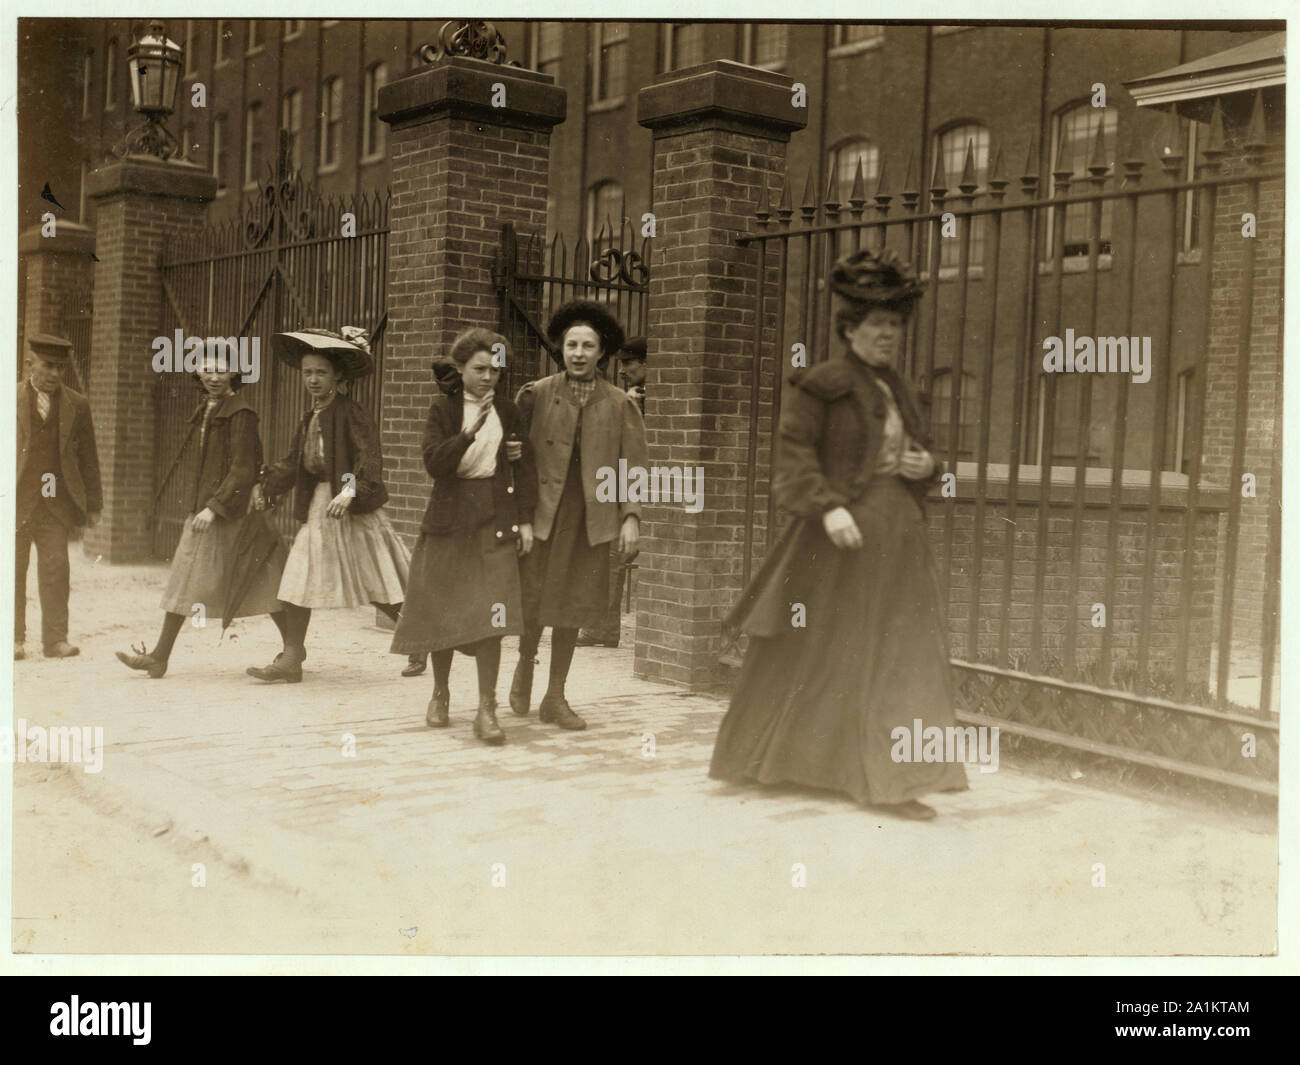 Noon hour, Cocheco Mfg. Co., Dover, N.H. May 17, 1909. Young girls working regularly. A number of others there, some even younger. Stock Photo